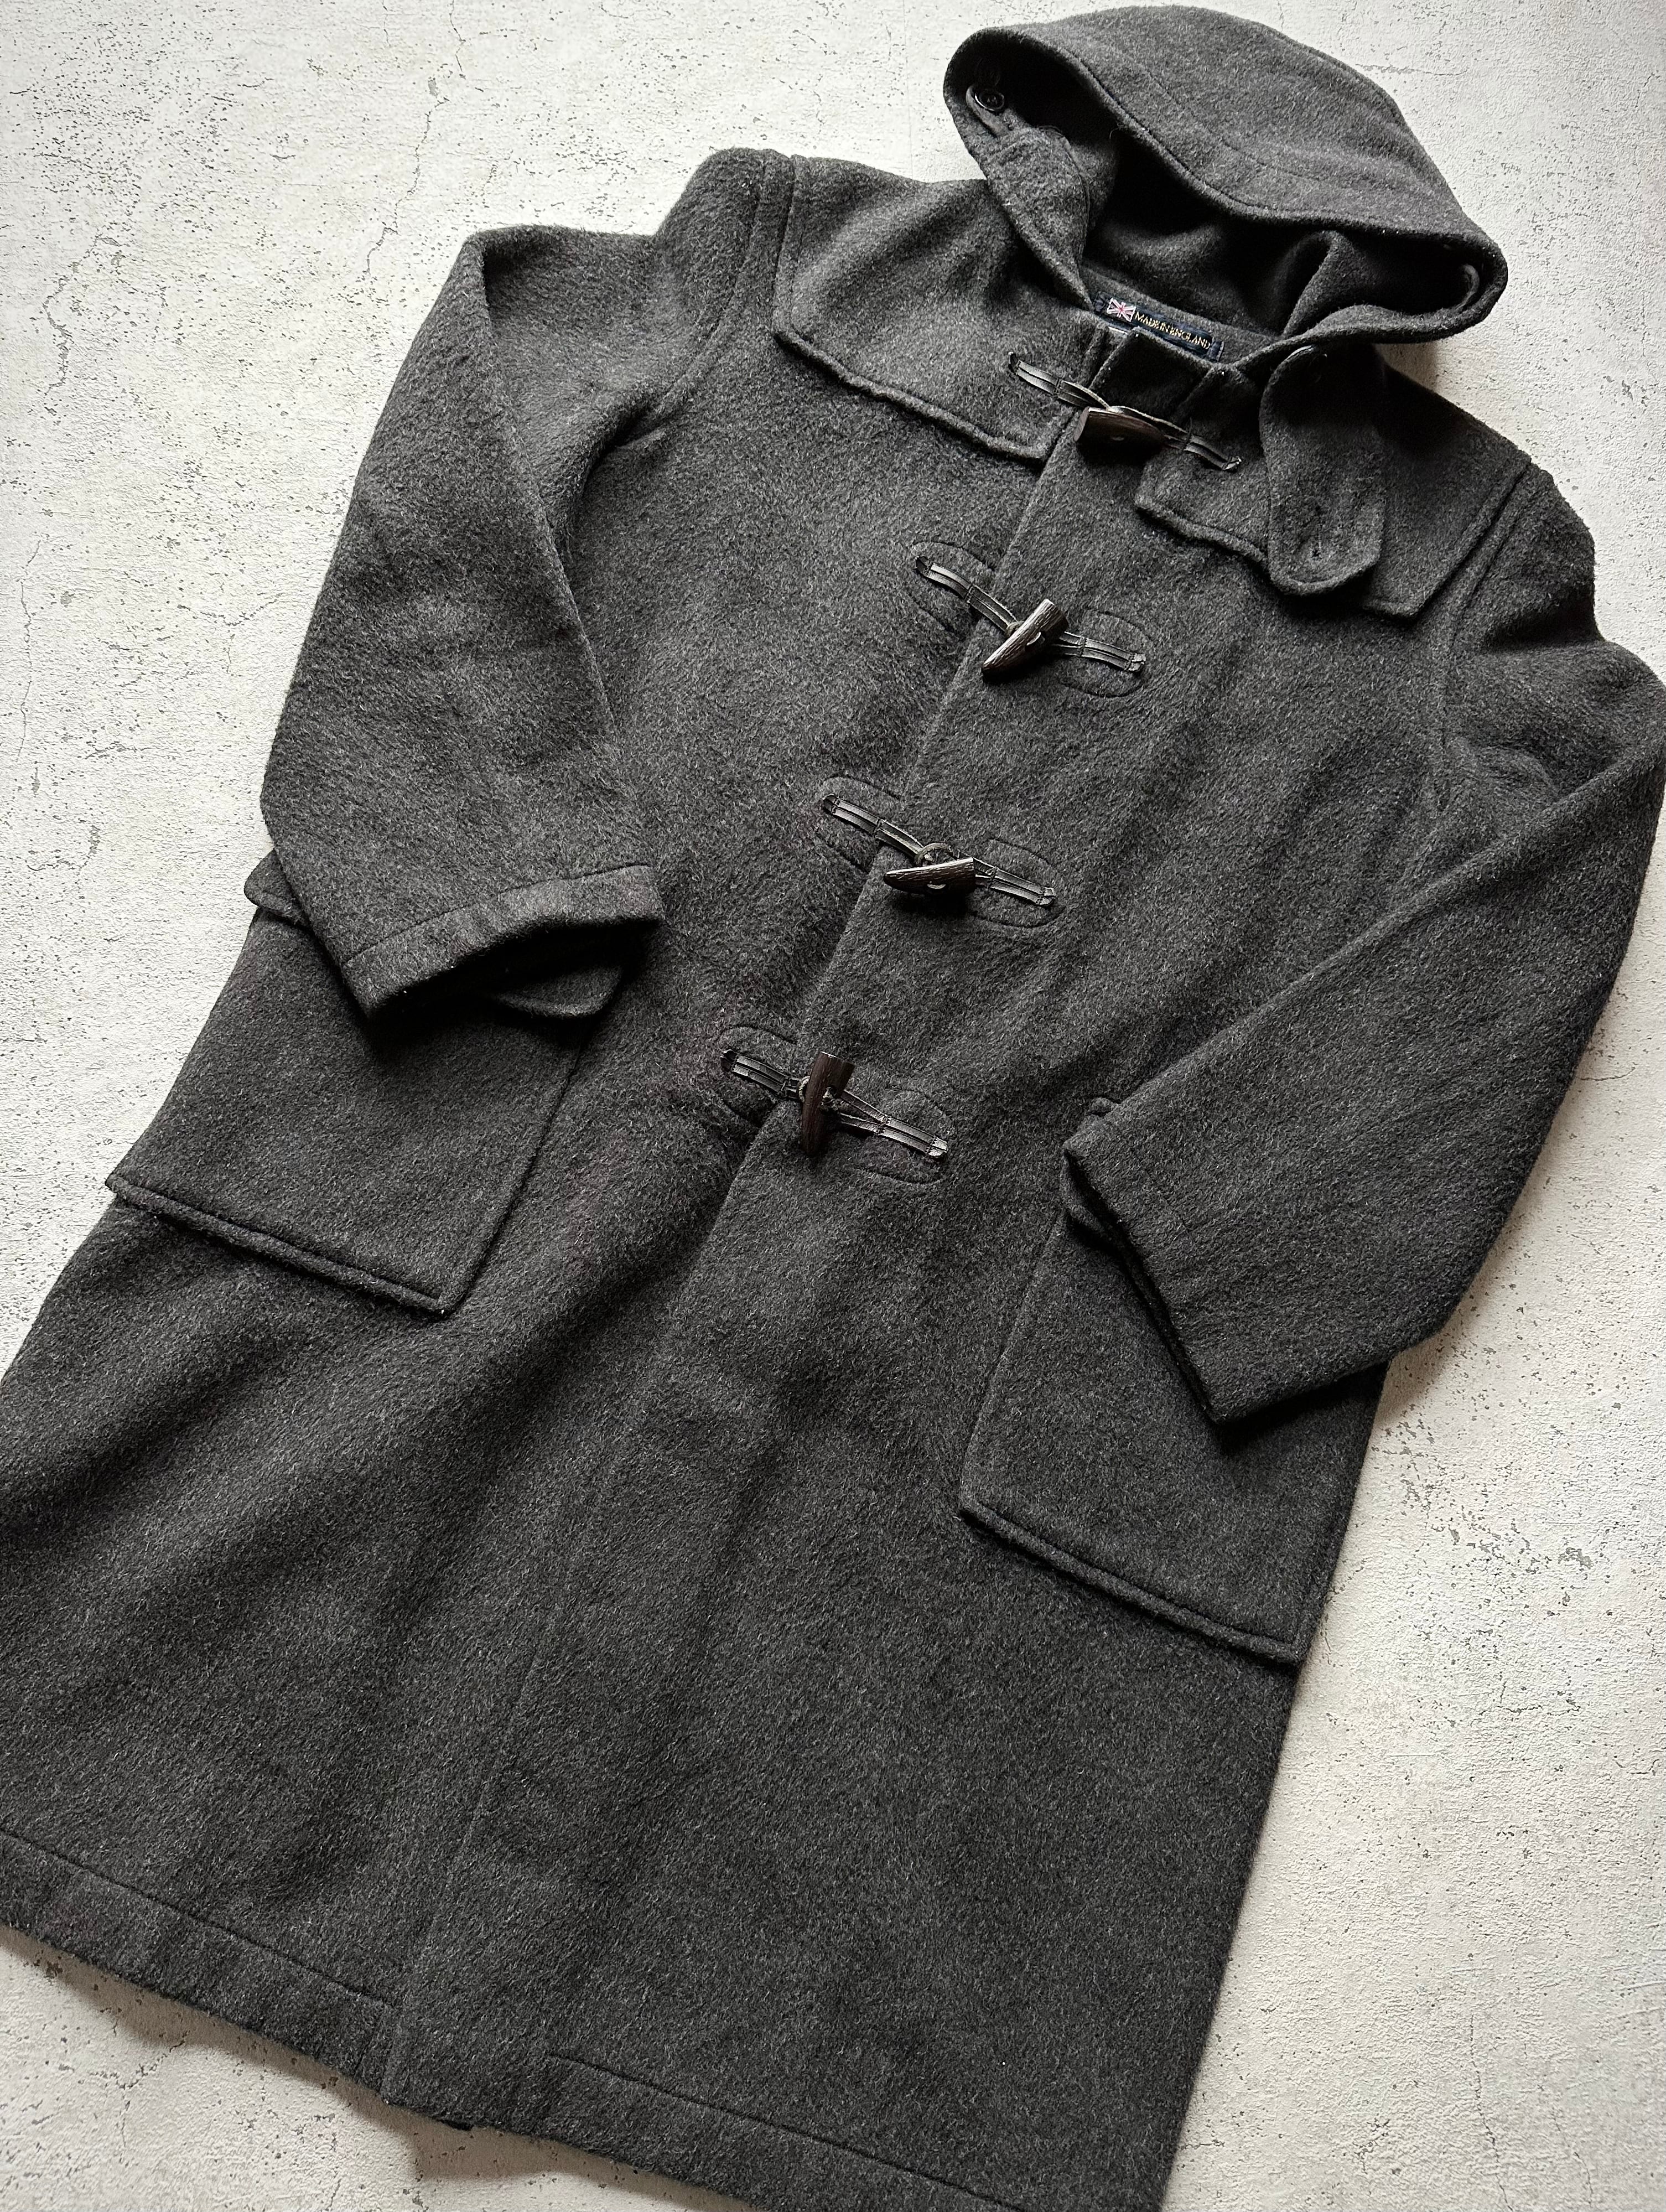 80s-90s MADE IN ENGLAND GLOVERALL / DUFFLE COAT CHARCOAL OLD